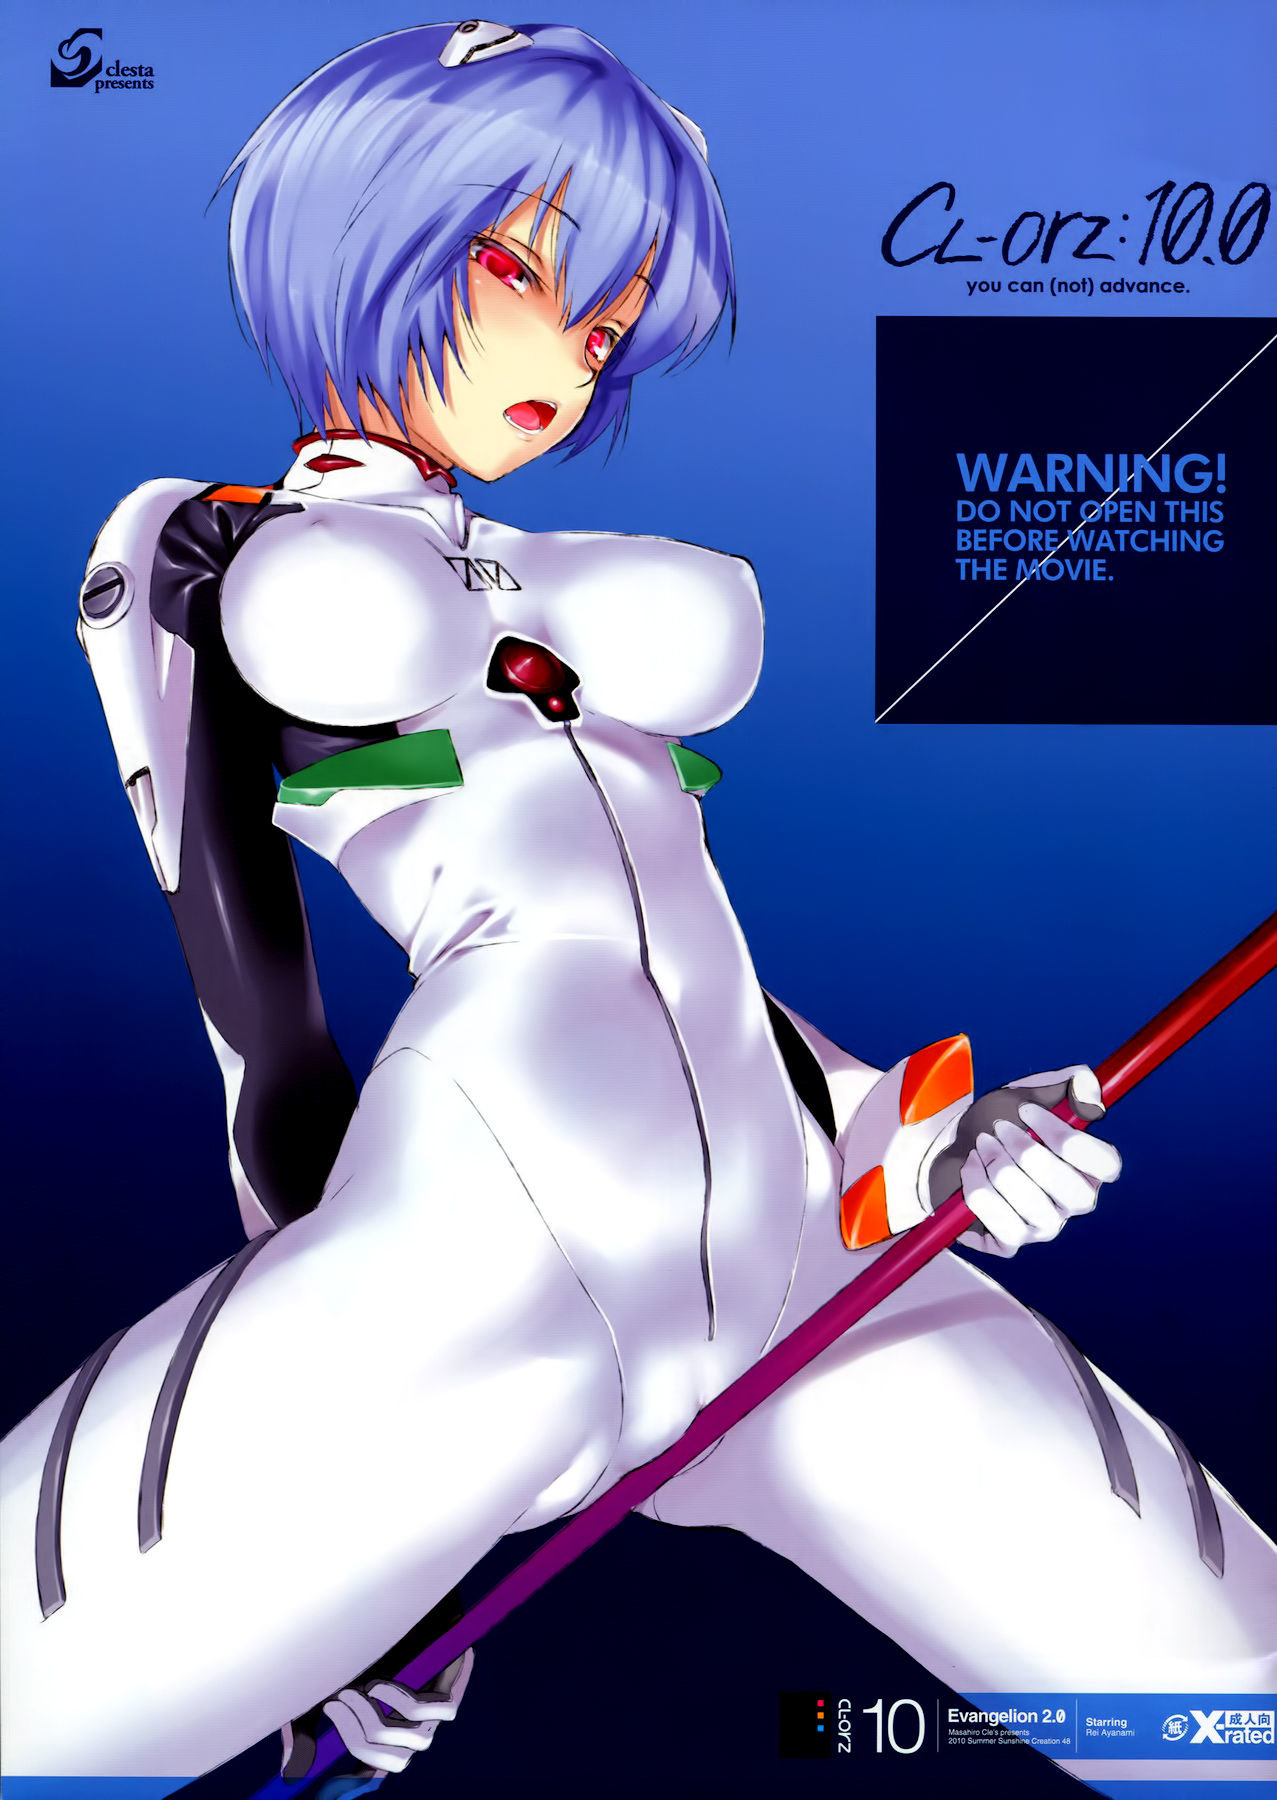 CL-orz_10 - you can (not) advance (decensored) (Neon Genesis Evangelion) - 0